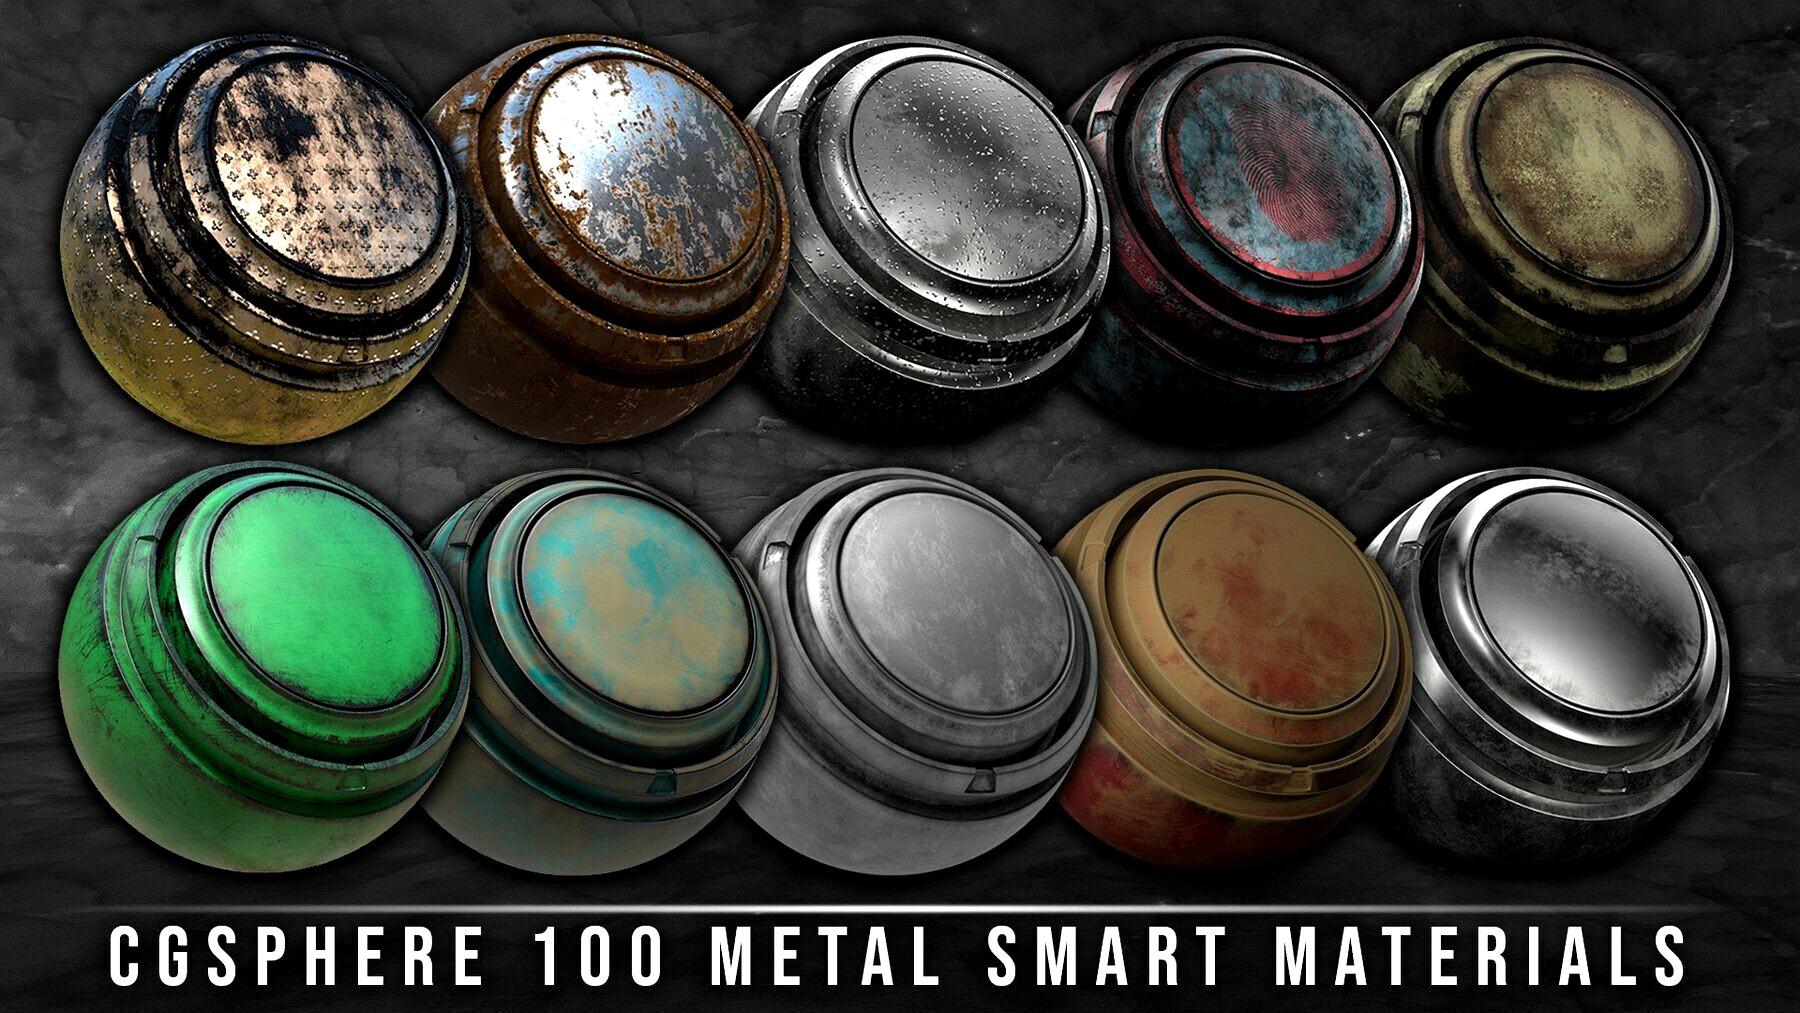 Metal Smart Materials Library ( Over 100 Types Of Metal Materials )